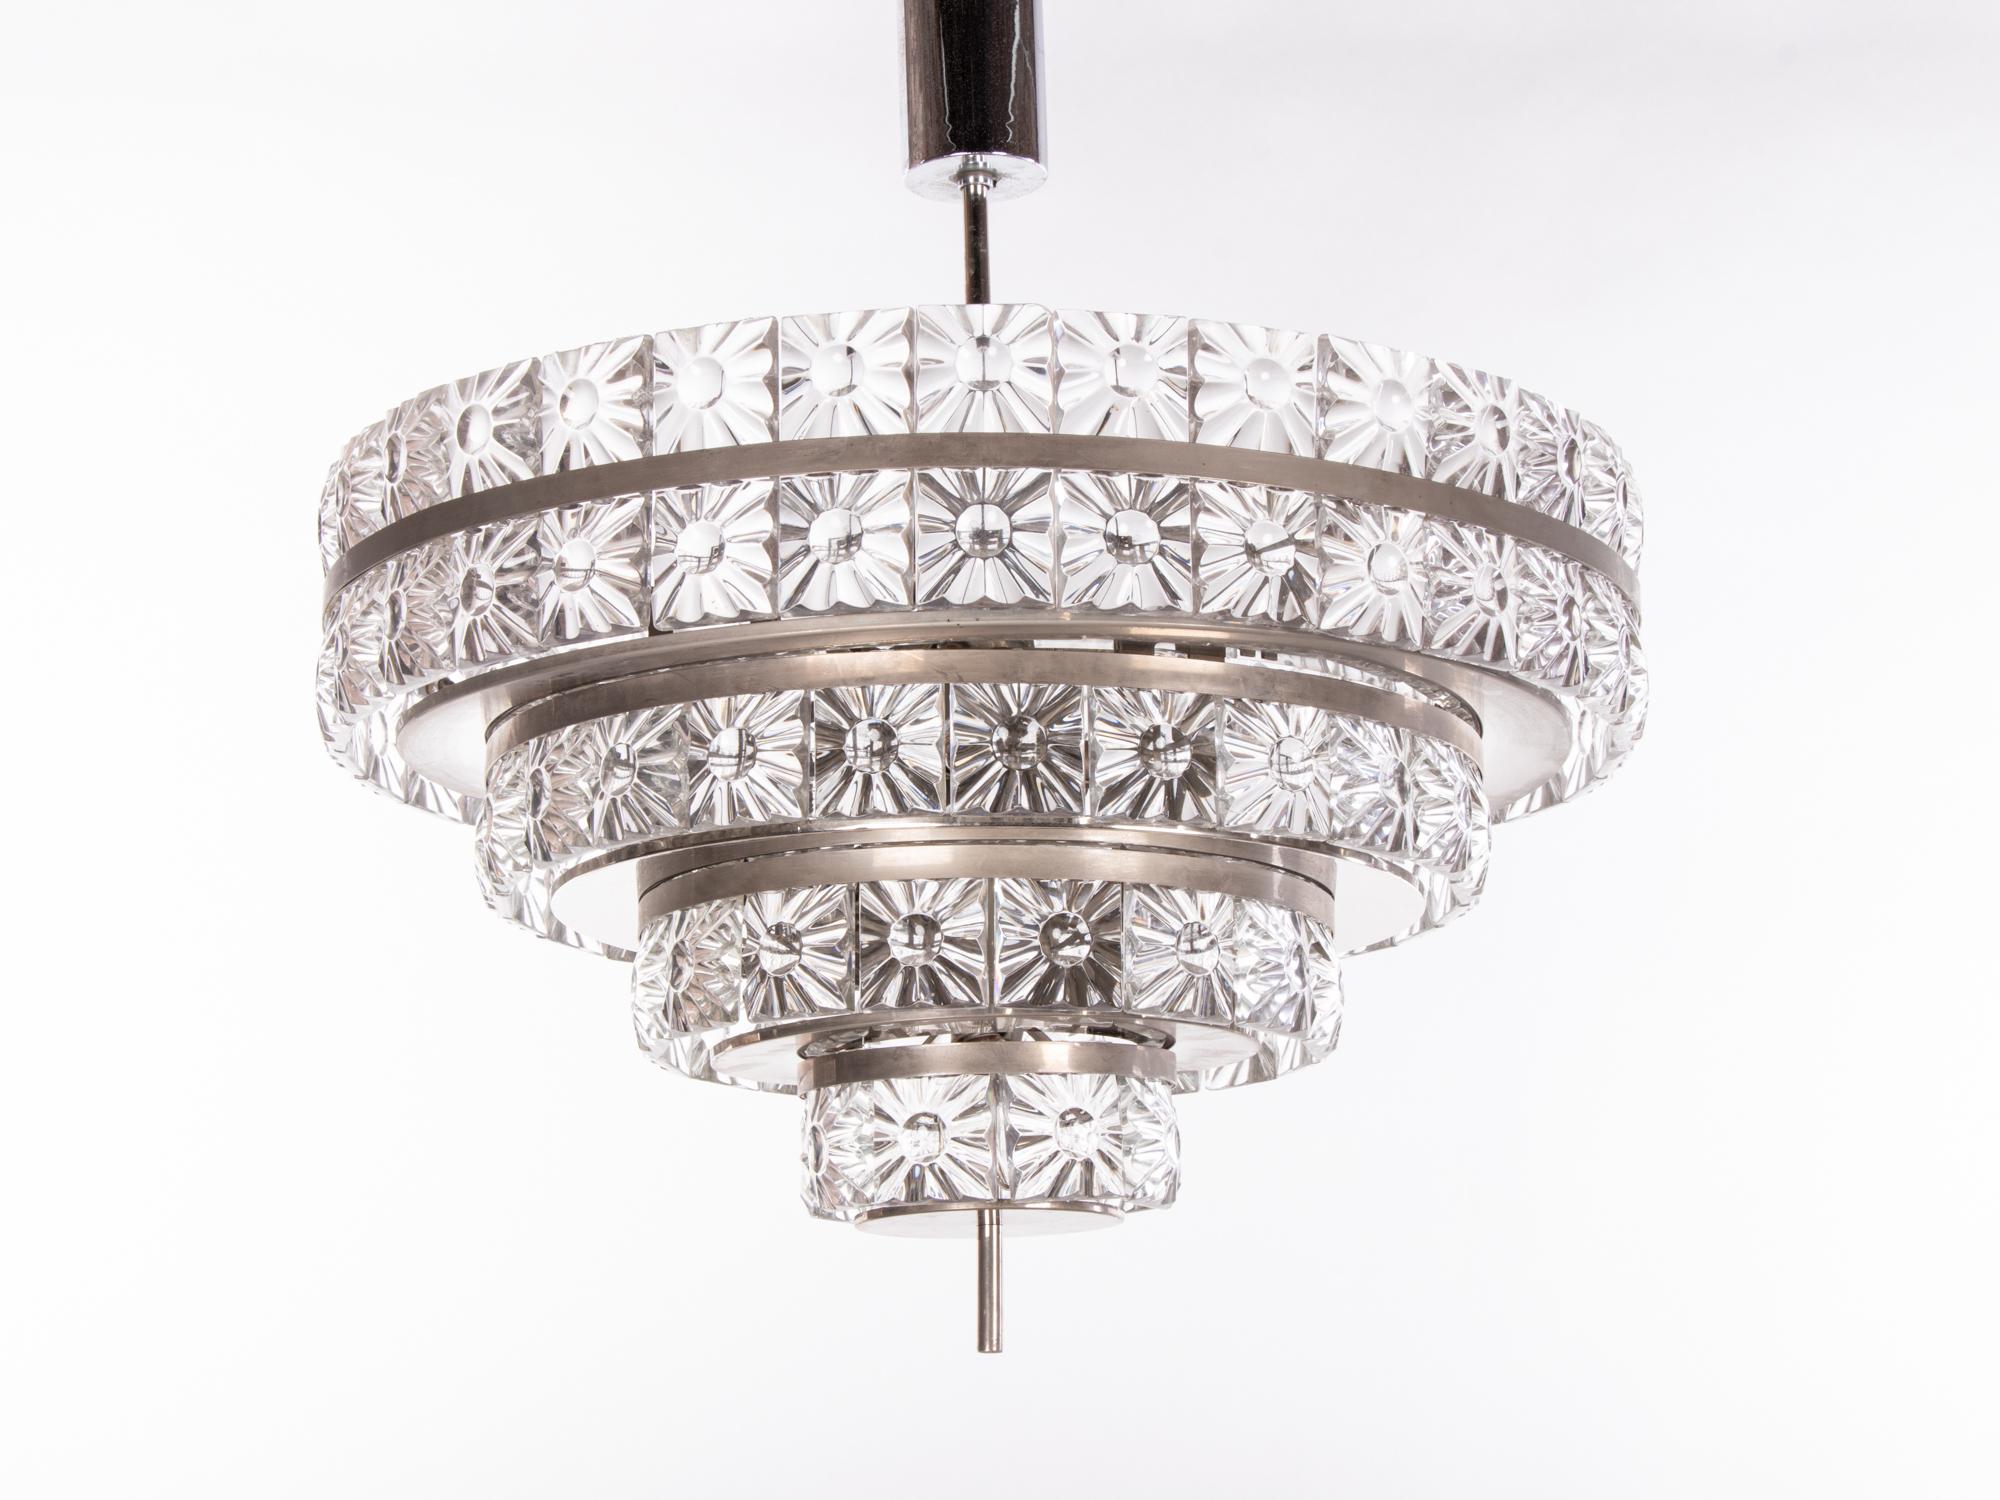 Stunning large five-tier lens chandelier with heavy crystal glass elements on a nickel frame. Crystal glasses resemble magnifying glasses. Has 18 sockets. In very good condition. Chandelier illuminates beautifully and offers a lot of light. Gem from